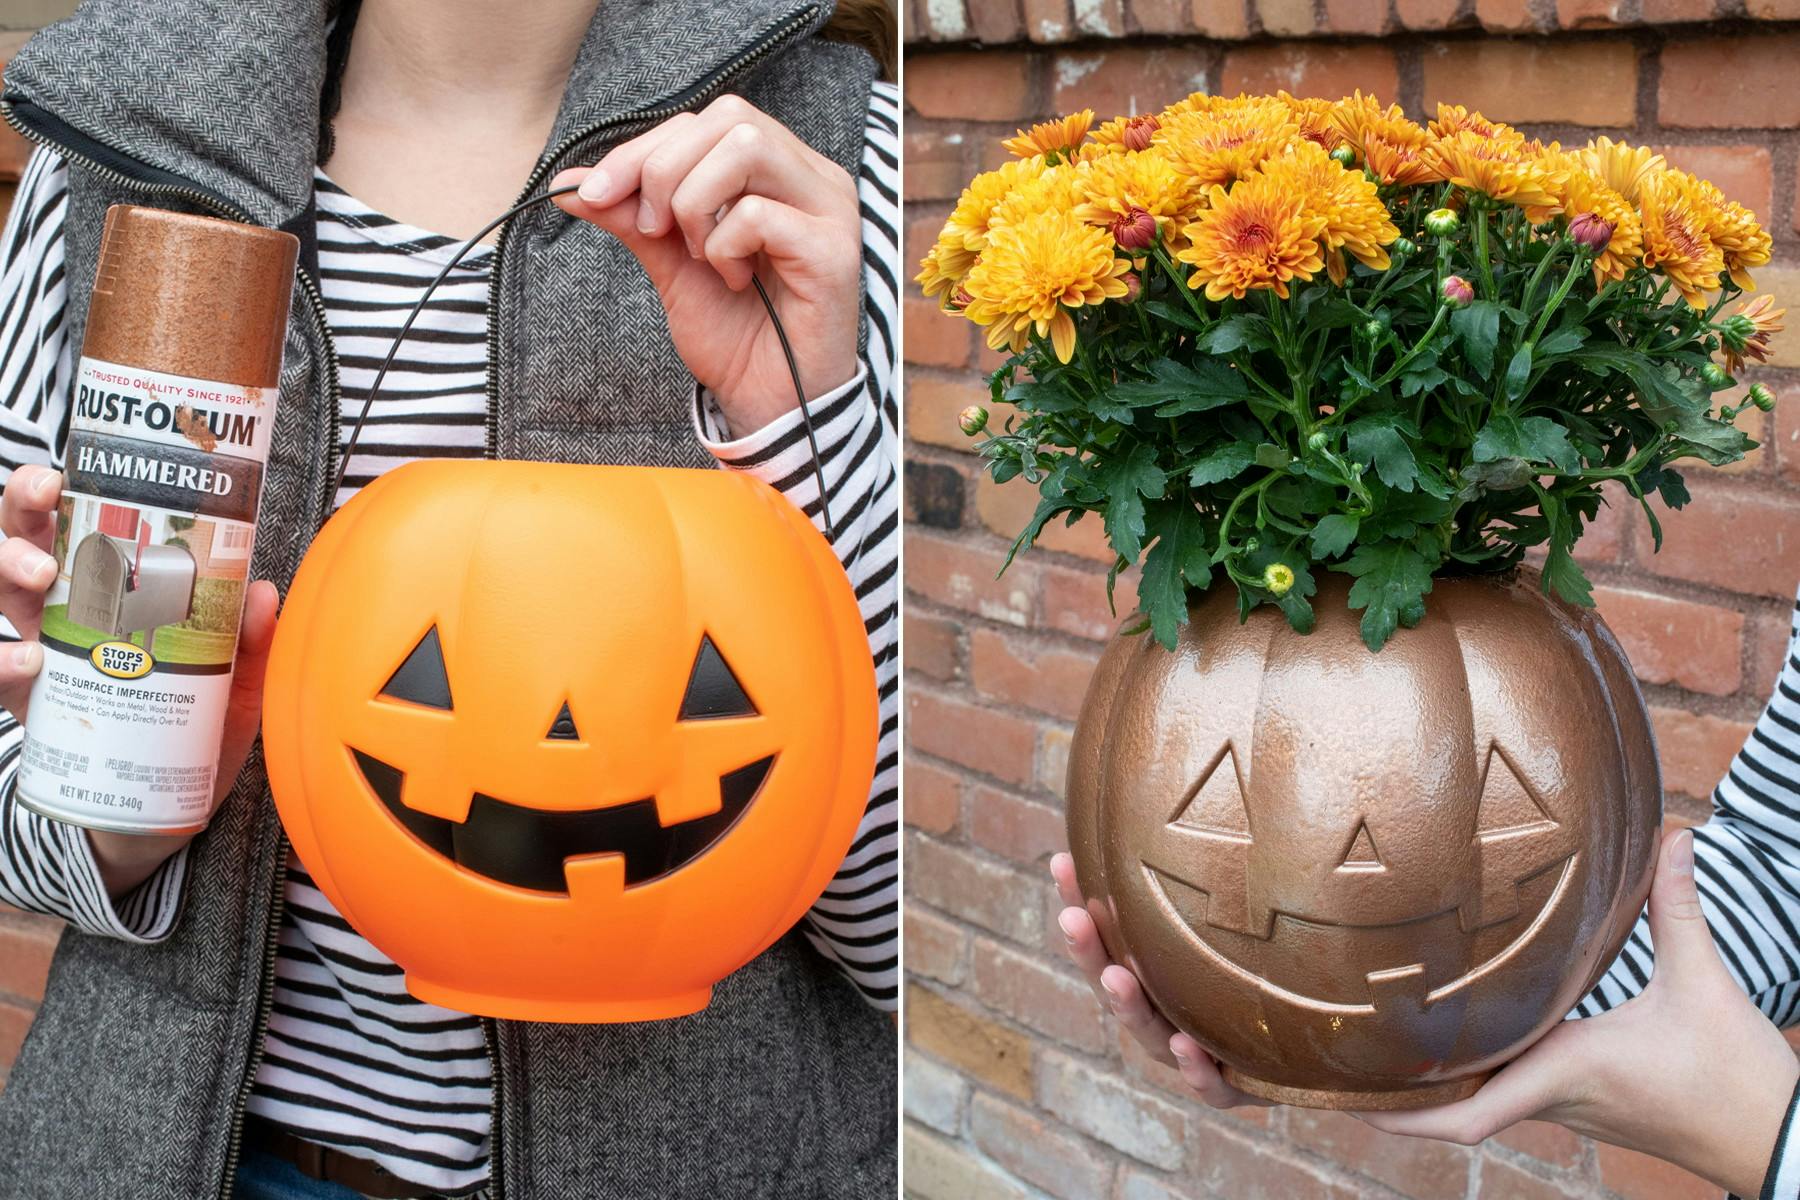 A person holding up a can of copper spray paint and a trick-or-treat pumpkin pail, and the faux copper flower pot finished piece with flowers in it.